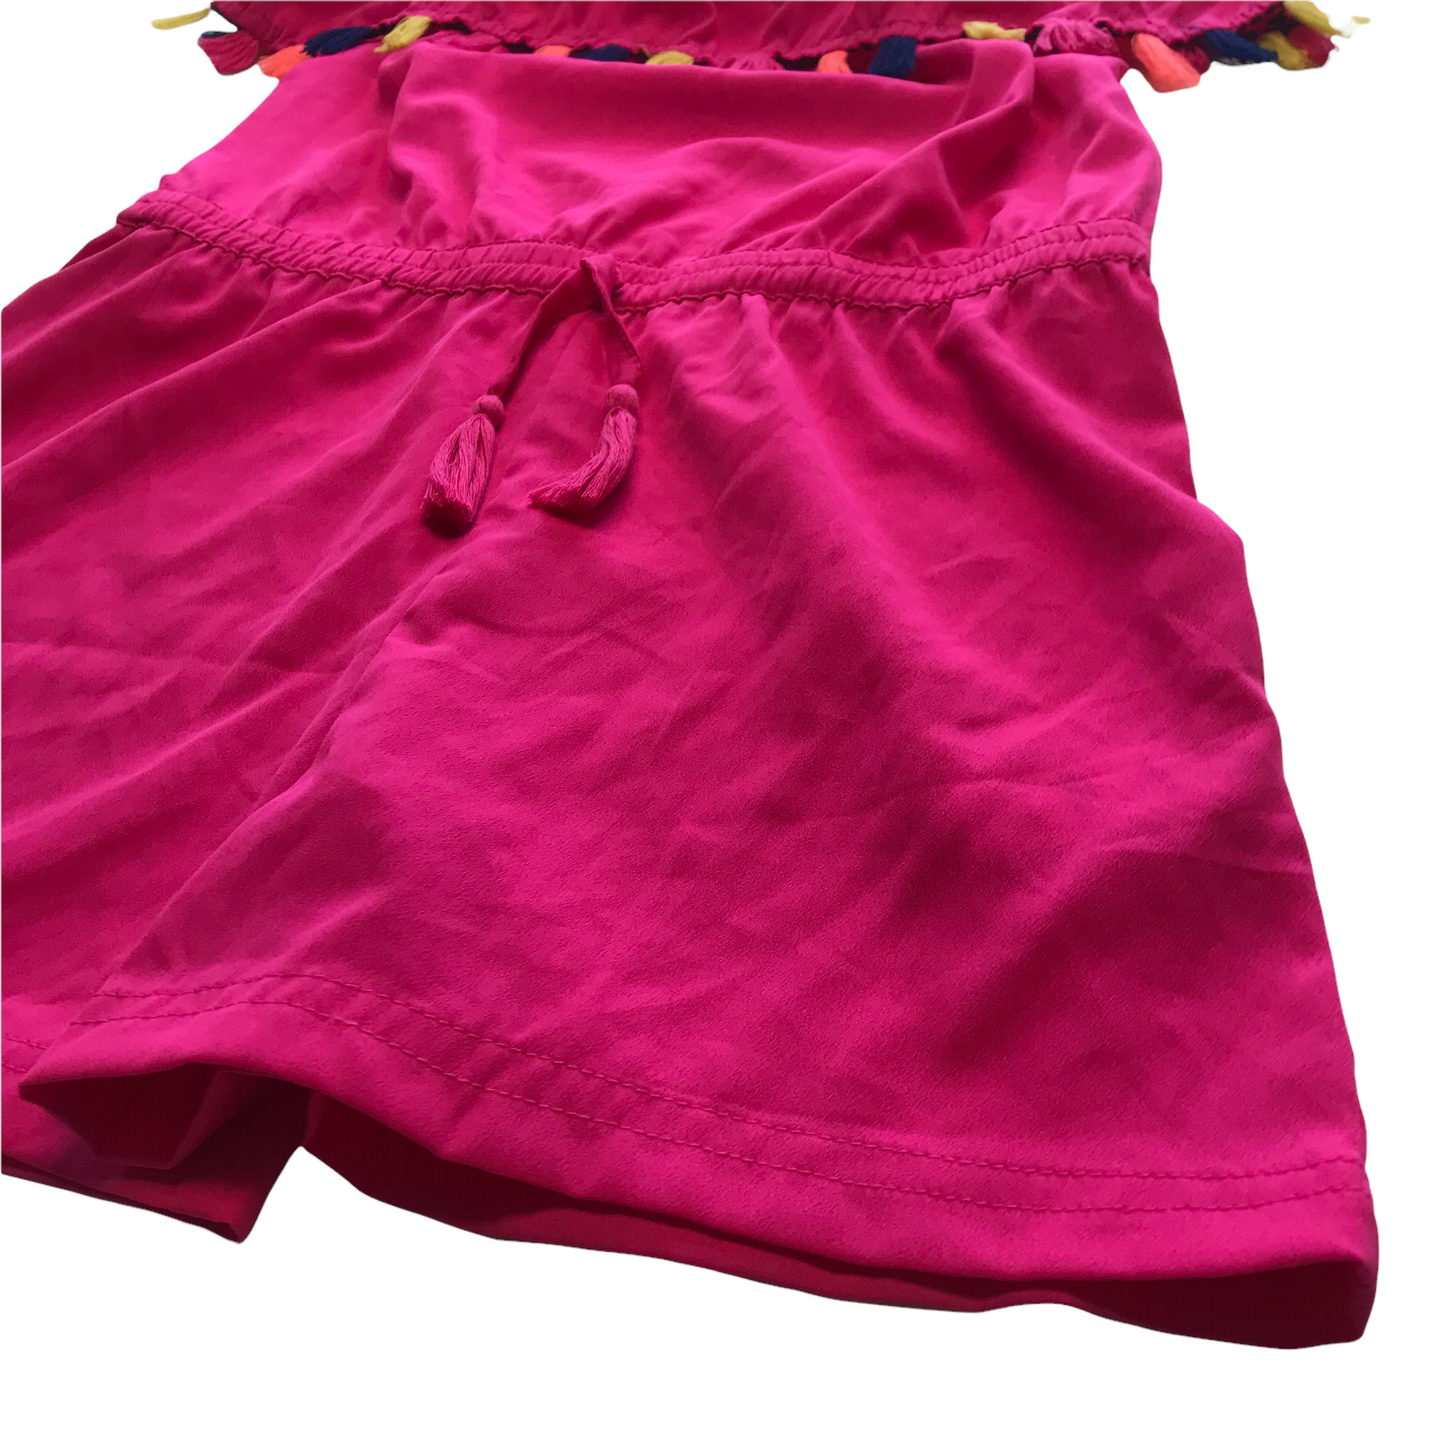 PEP&Co Pink Playsuit with Tassel Details Age 9